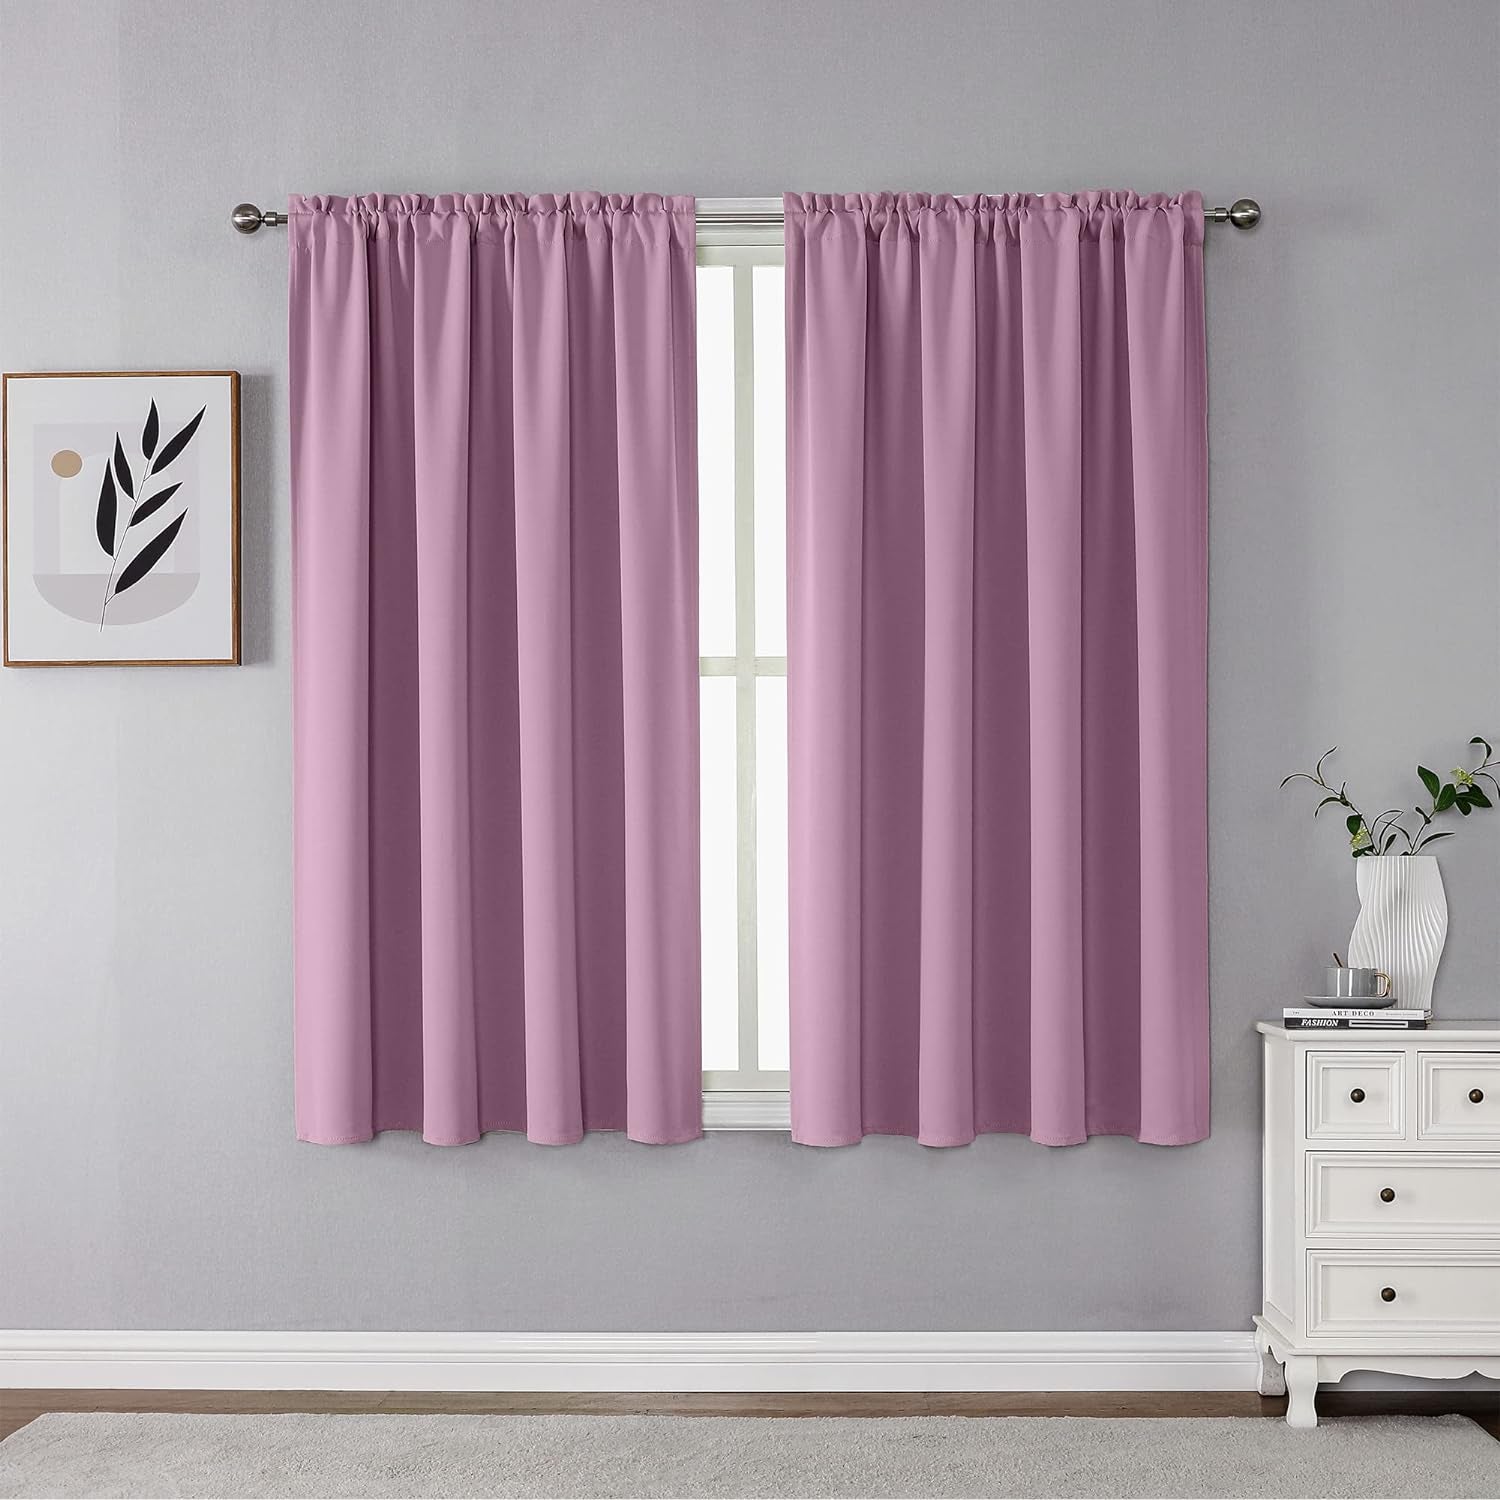 CUCRAF Blackout Curtains 84 Inches Long for Living Room, Light Beige Room Darkening Window Curtain Panels, Rod Pocket Thermal Insulated Solid Drapes for Bedroom, 52X84 Inch, Set of 2 Panels  CUCRAF Light Pink 52W X 54L Inch 2 Panels 